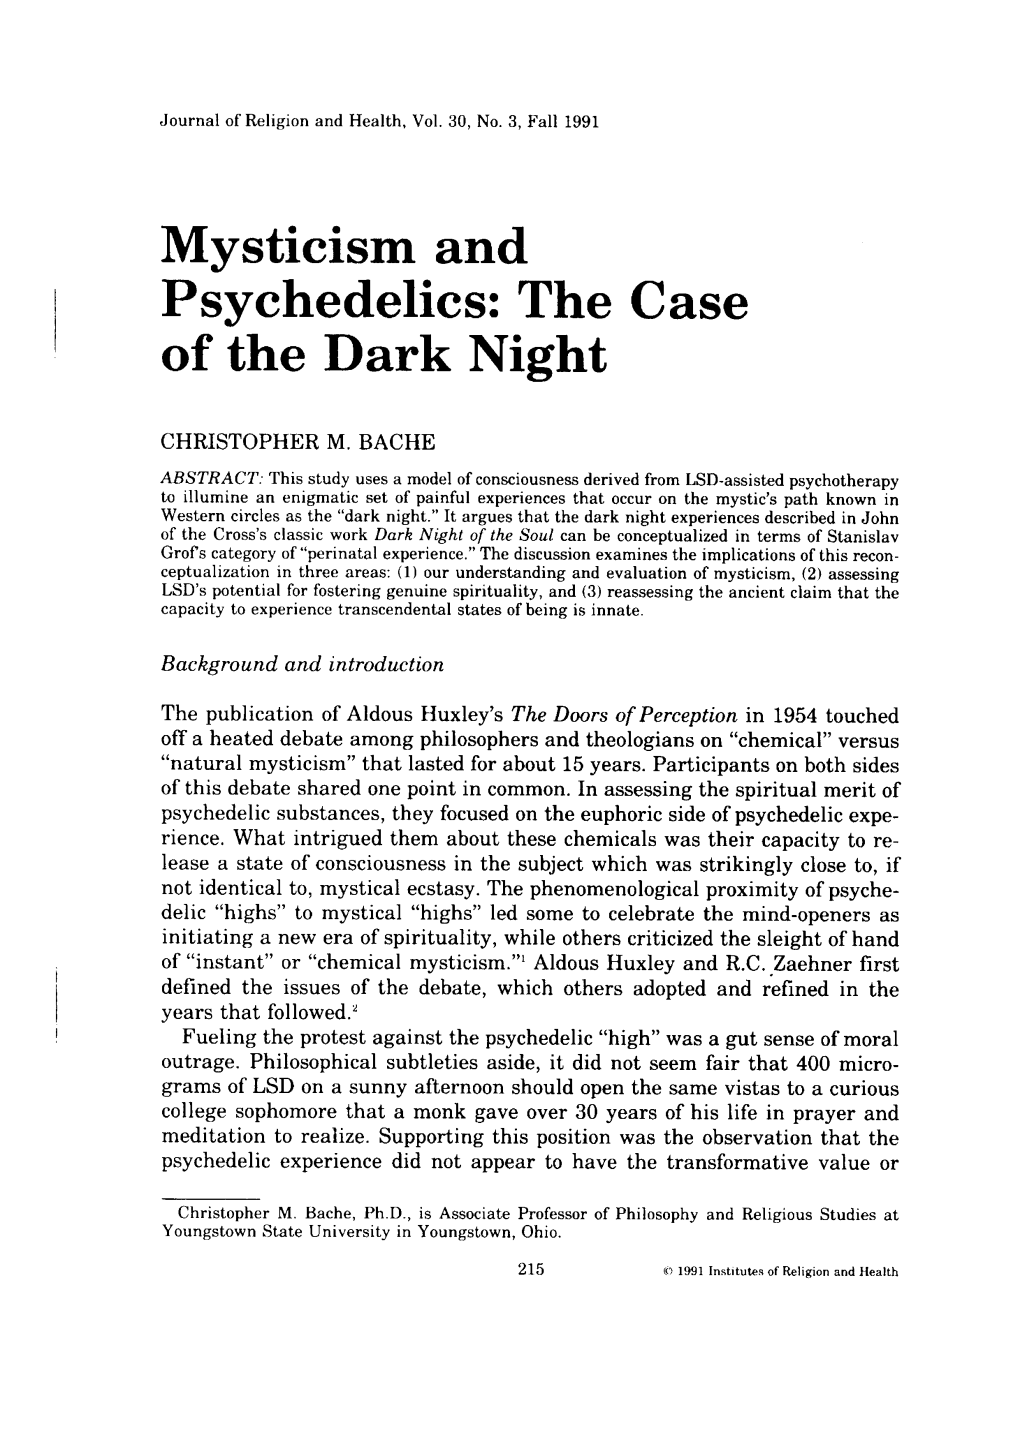 Mysticism & Psychedelics: the Case of the Dark Night